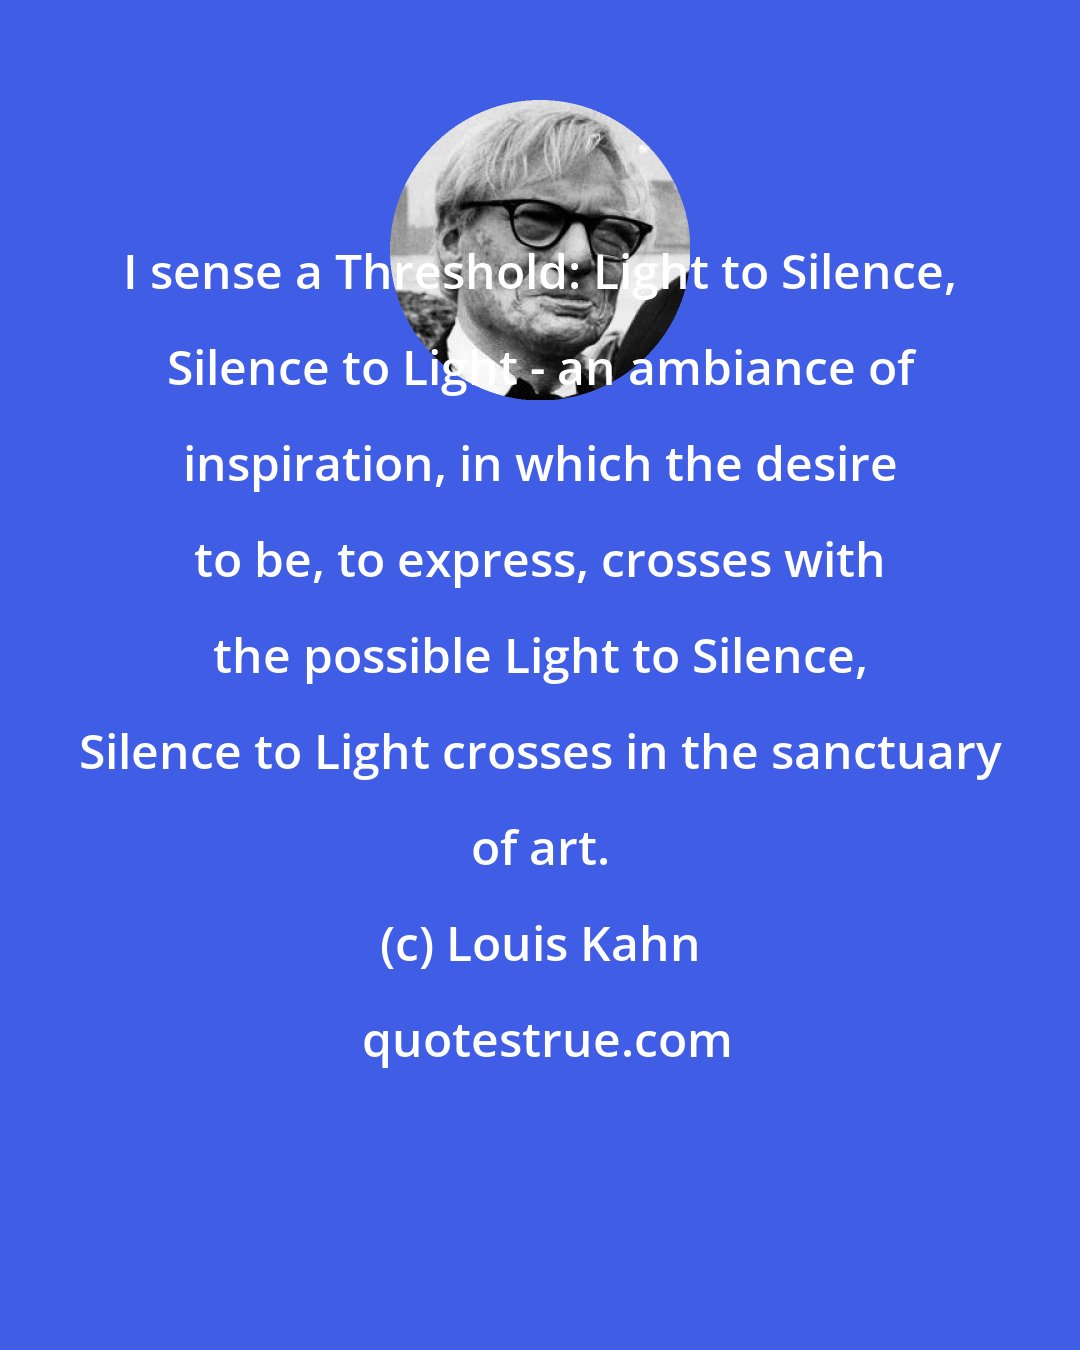 Louis Kahn: I sense a Threshold: Light to Silence, Silence to Light - an ambiance of inspiration, in which the desire to be, to express, crosses with the possible Light to Silence, Silence to Light crosses in the sanctuary of art.